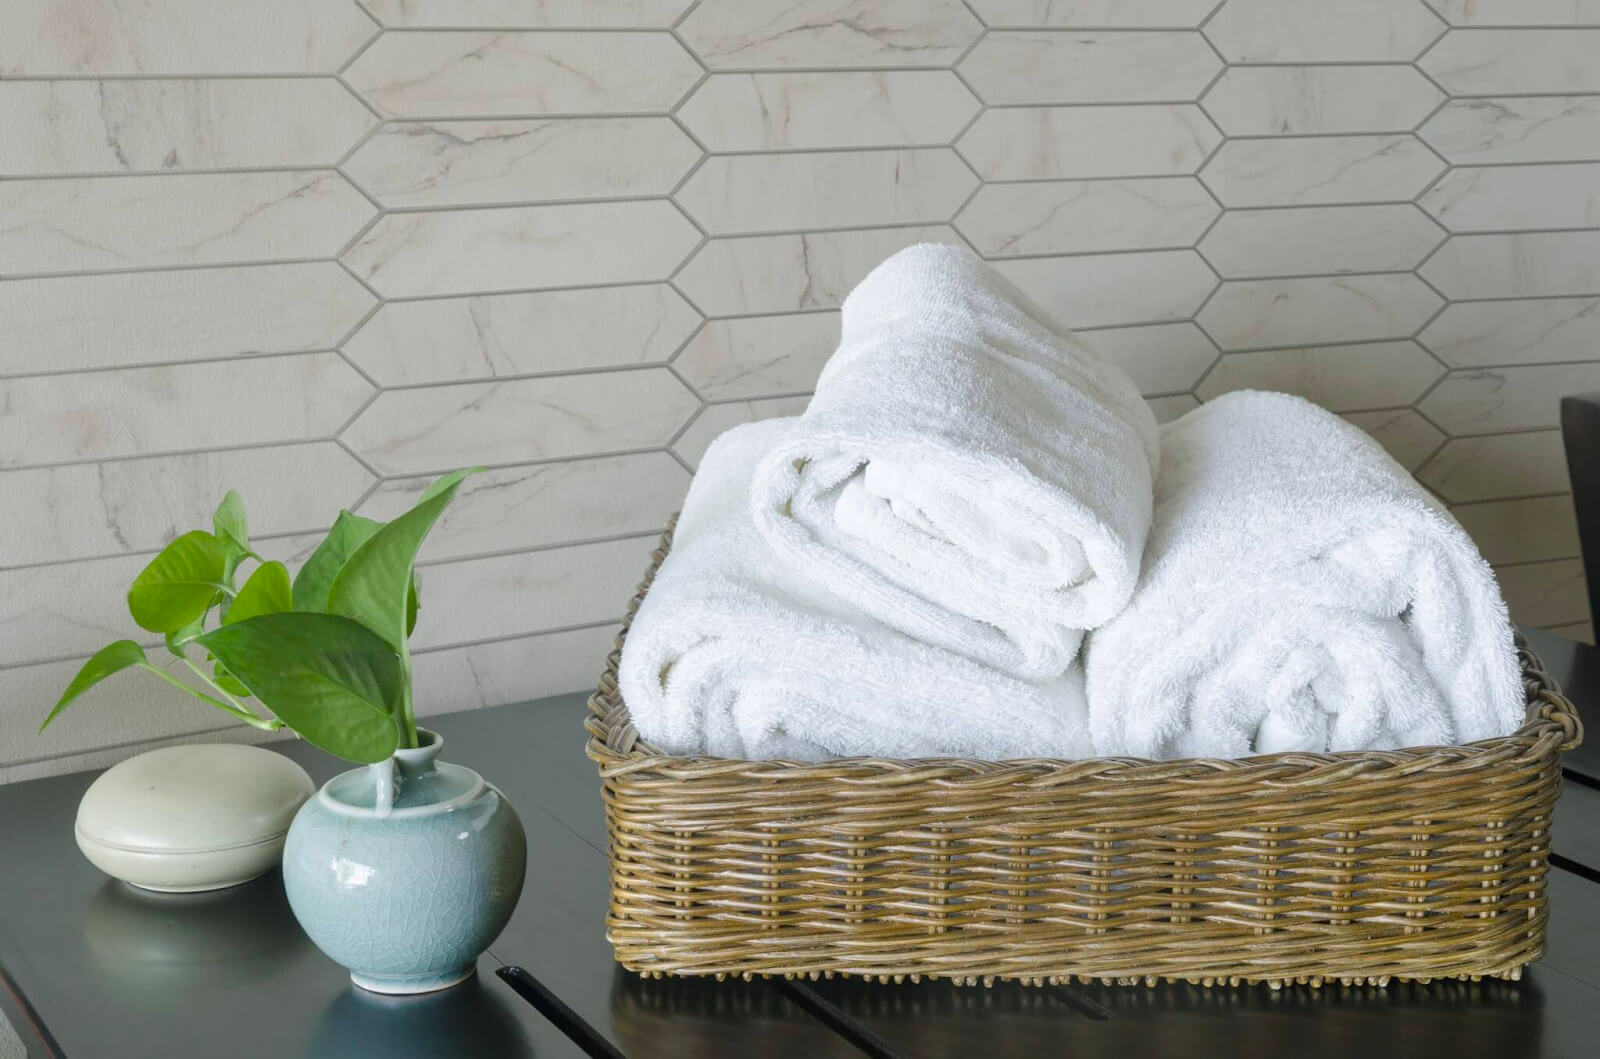 Bathroom towels with white marble-look tile in a horizontal picket fence layout

